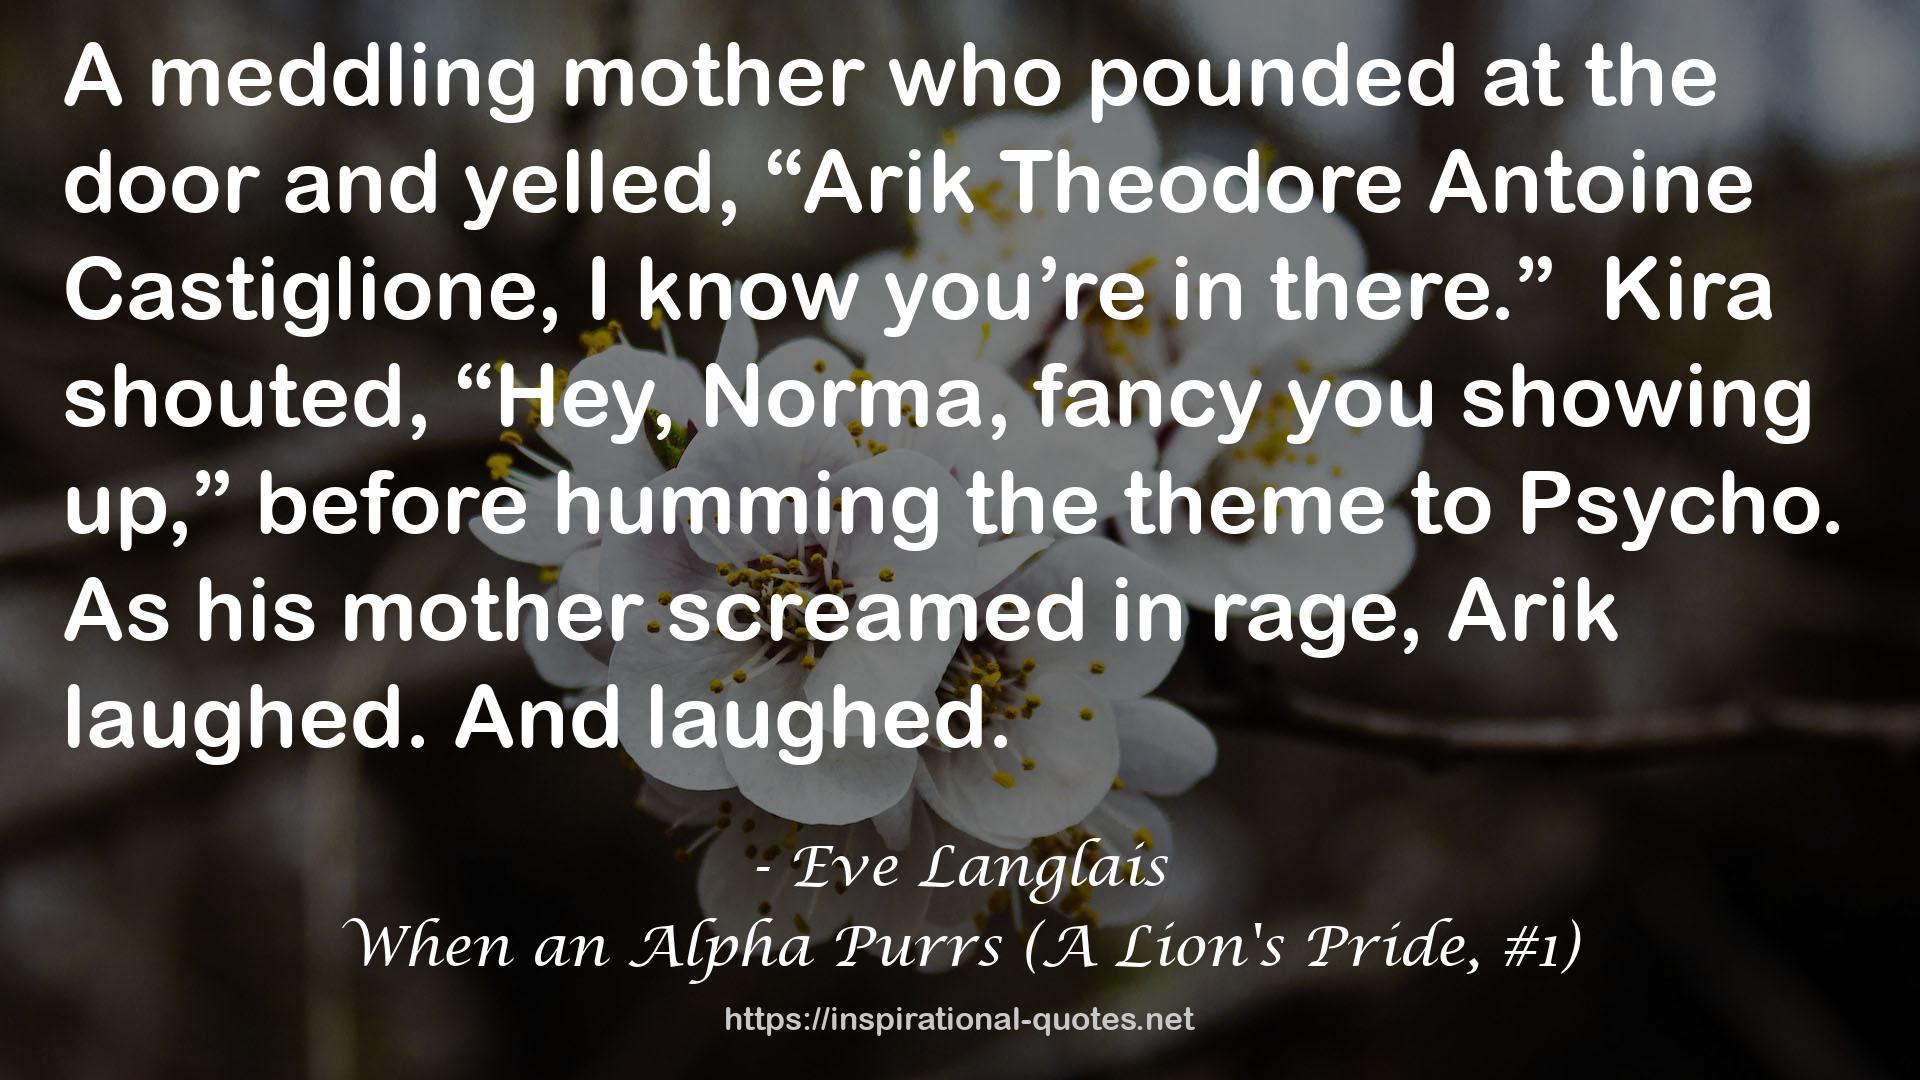 When an Alpha Purrs (A Lion's Pride, #1) QUOTES